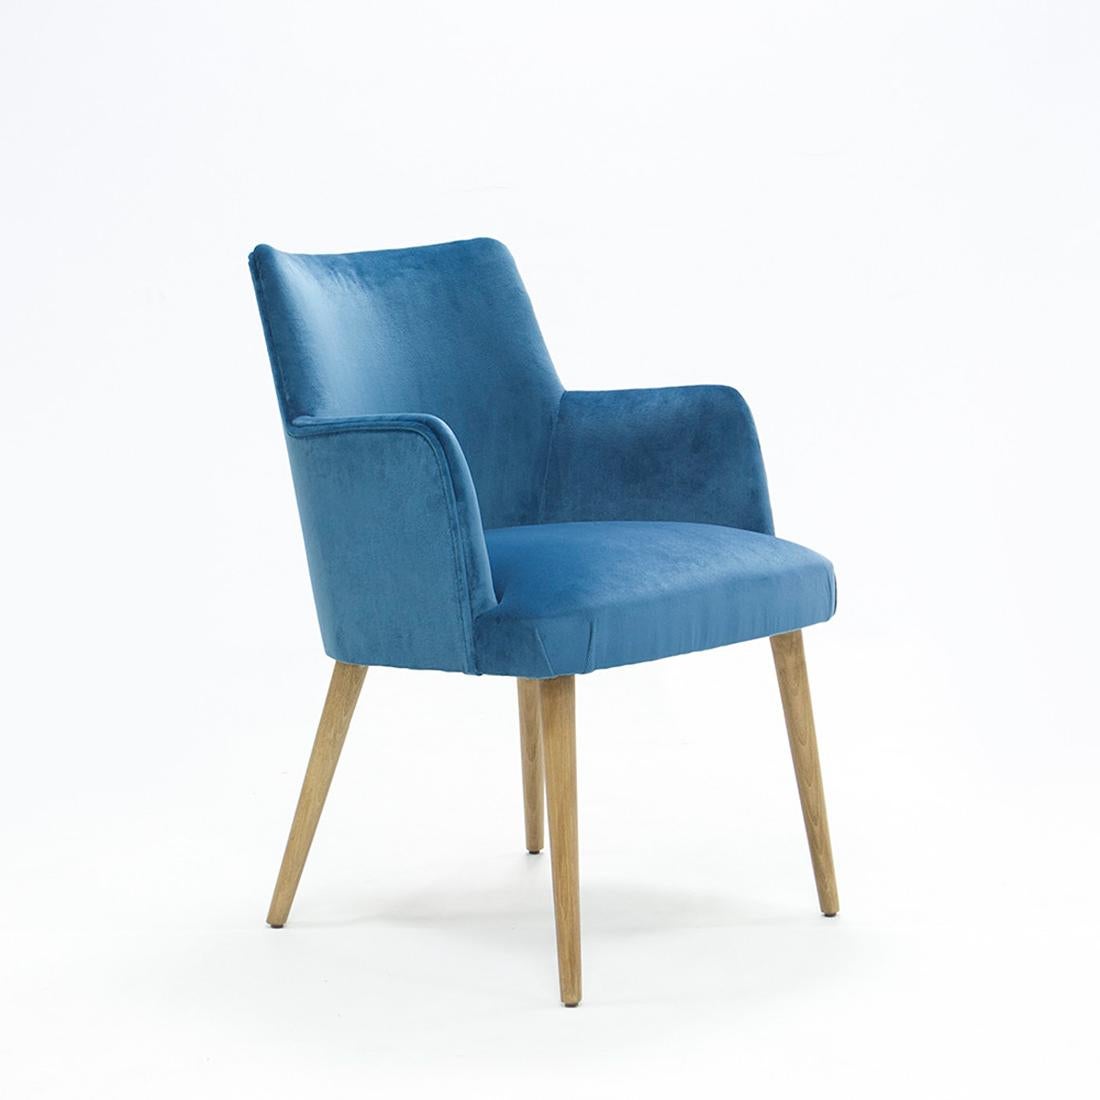 Chair Lalia with structure in solid wood, upholstered
seat and back, covered with high quality blue velvet
fabric. Also available with other fabrics on request.
 